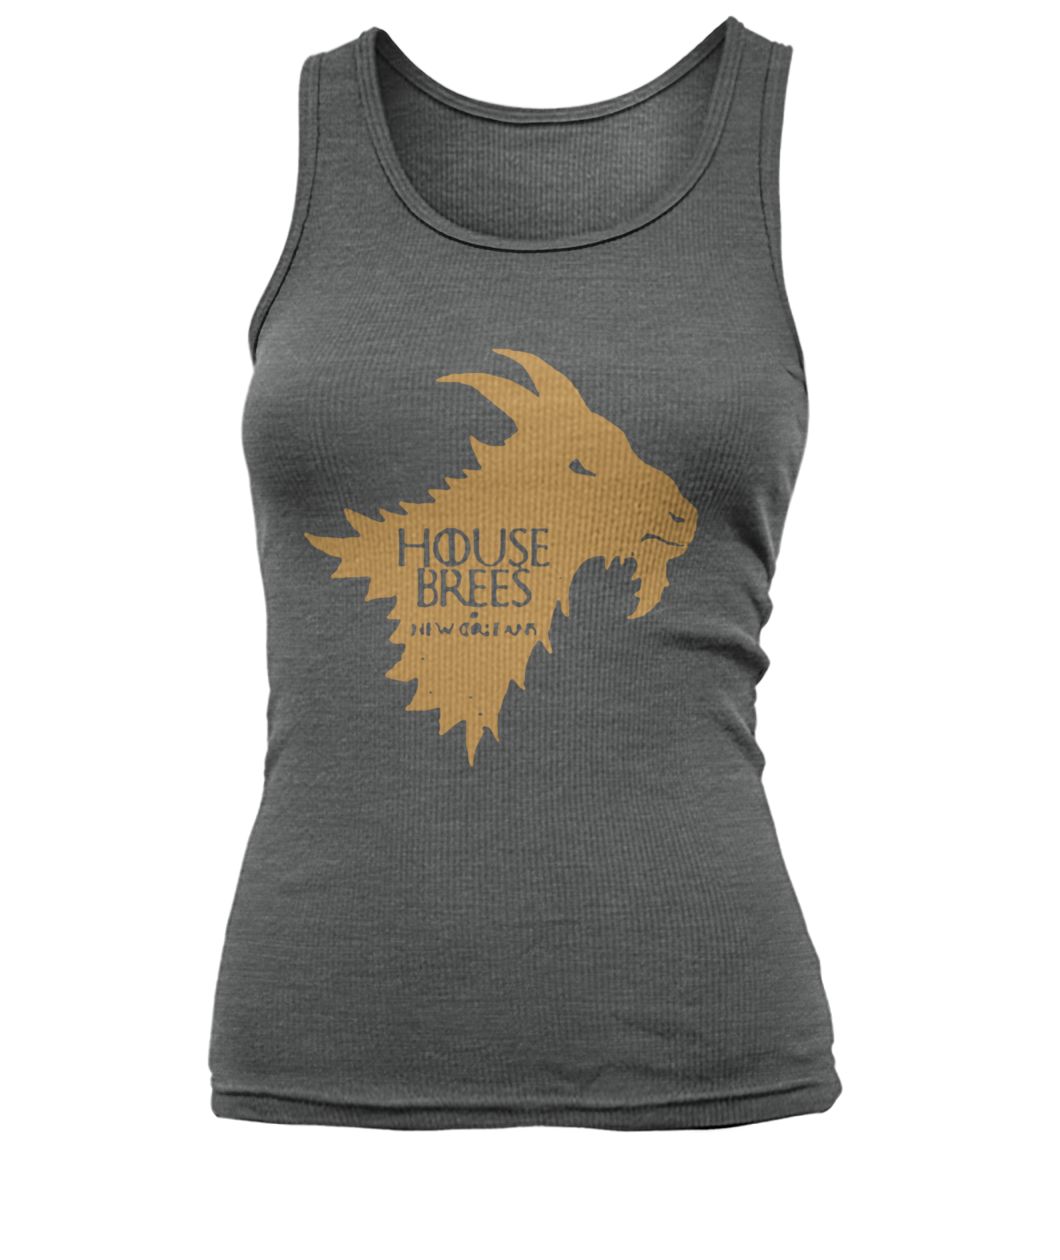 House brees game of thrones women's tank top